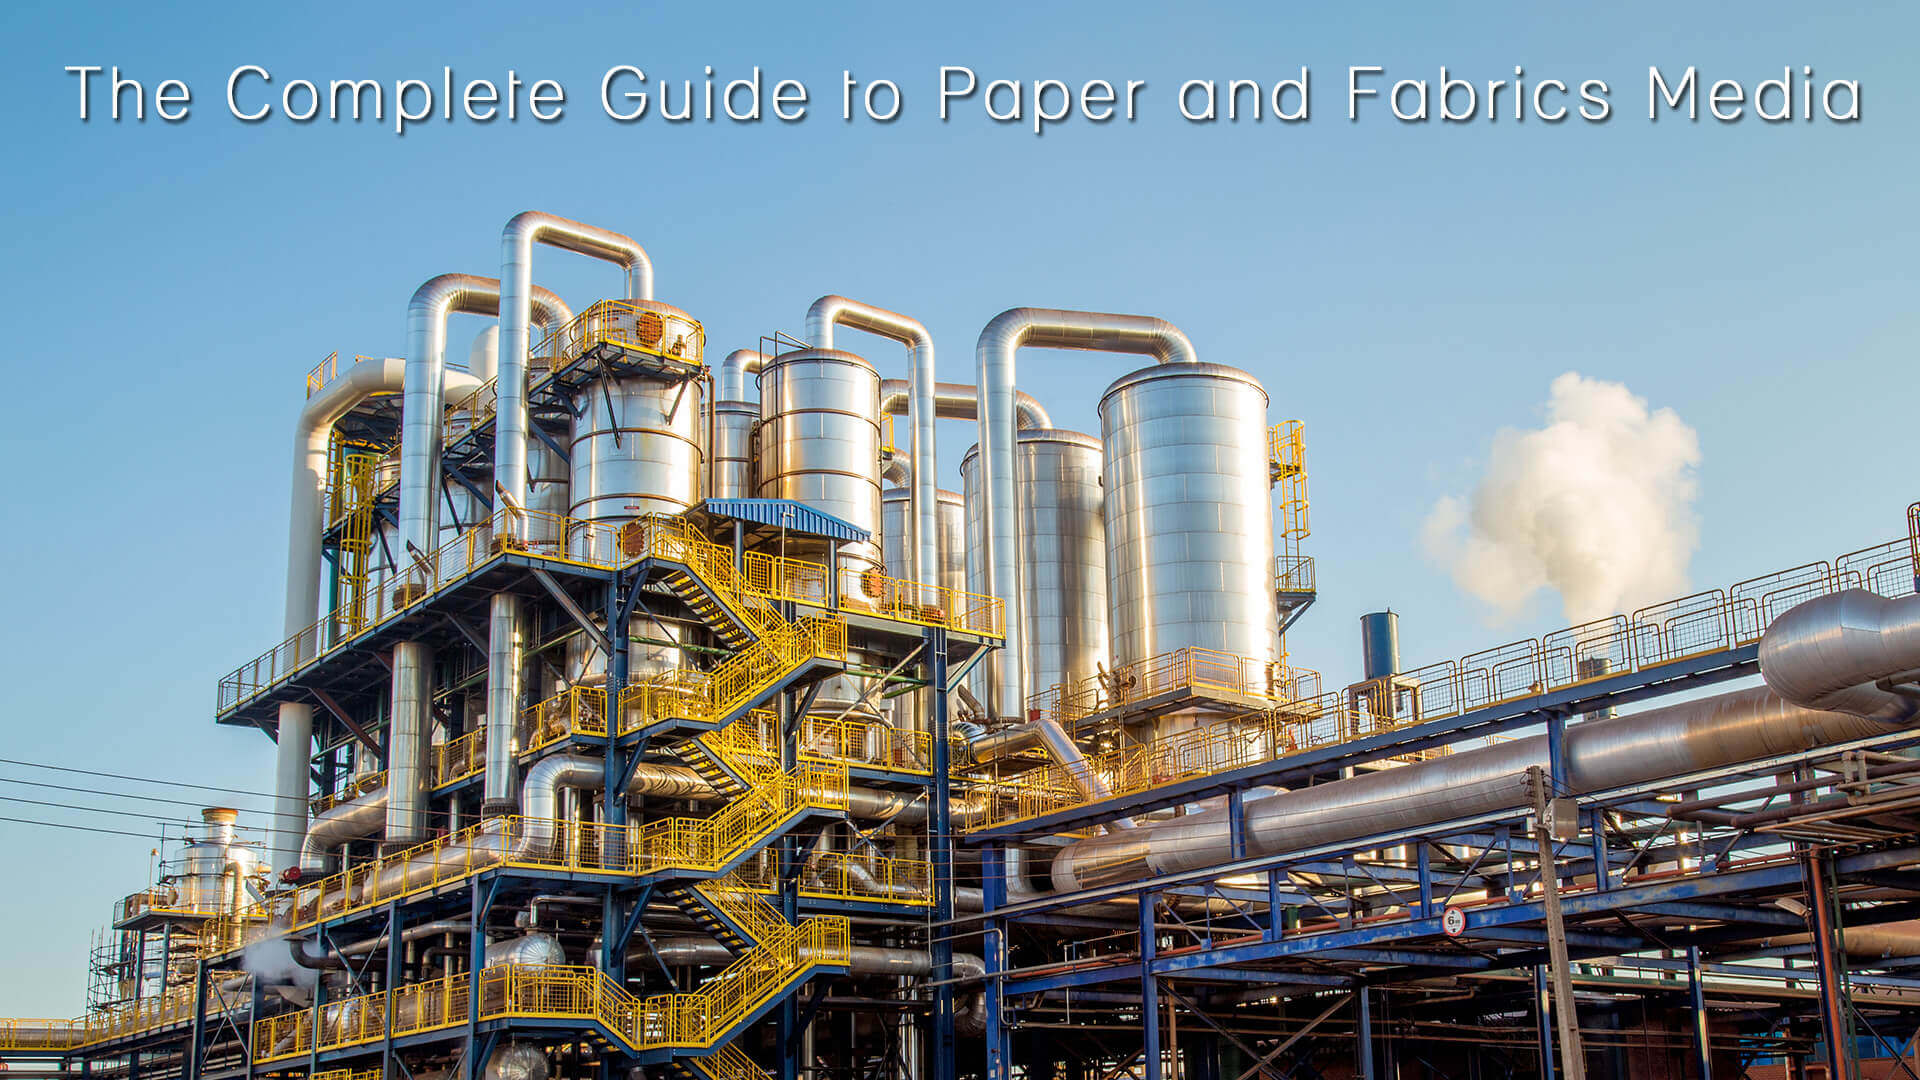 The Complete Guide to Paper and Fabrics Media